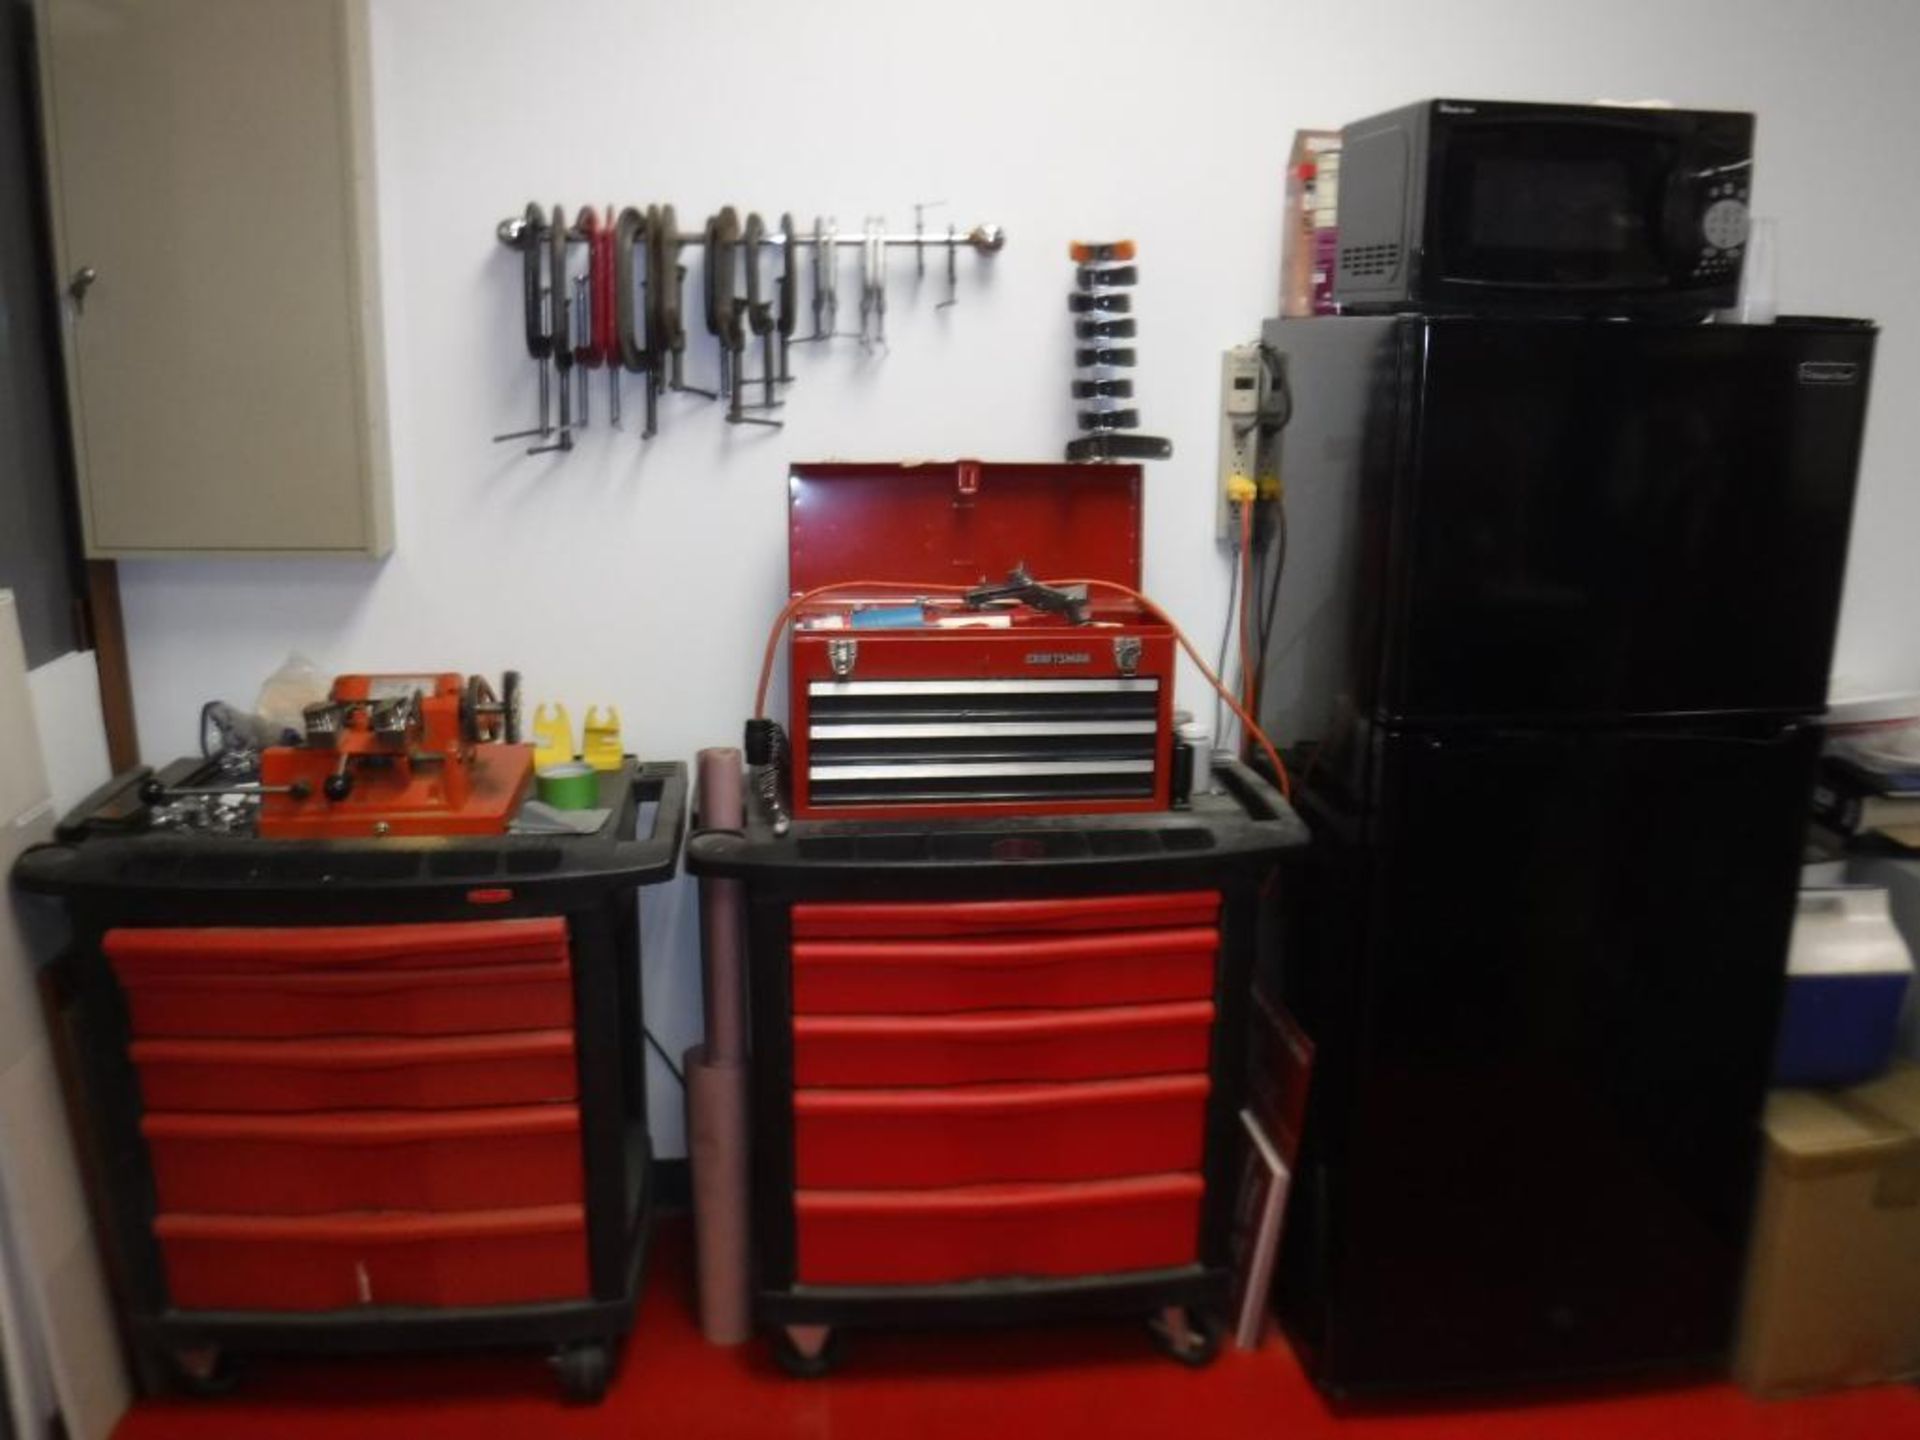 Lot c/o: Contents Maintenance Room (AV/IT NOT INCLUDED), Tool Boxes on Casters, Desk, File Cabinets, - Image 2 of 12